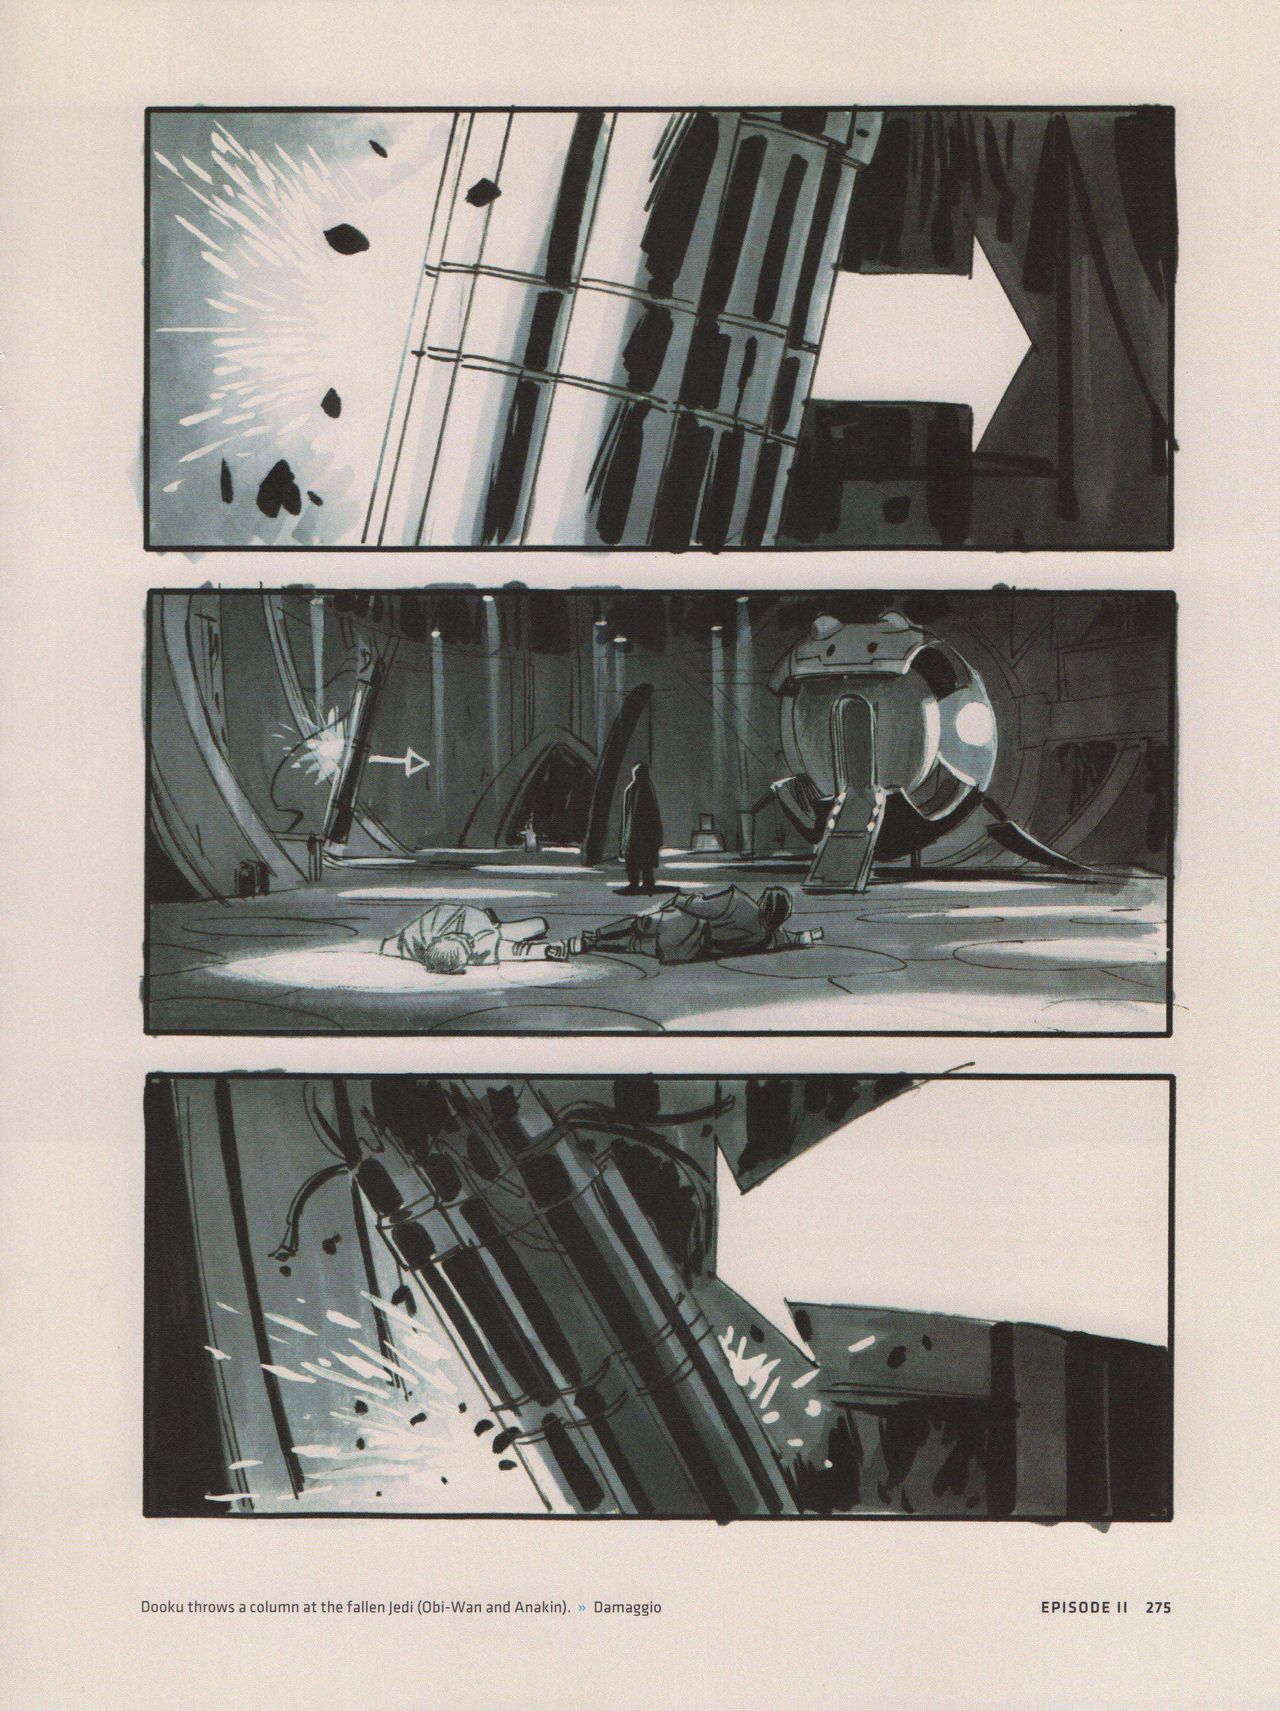 Star Wars Storyboards - The Prequel Trilogy 279